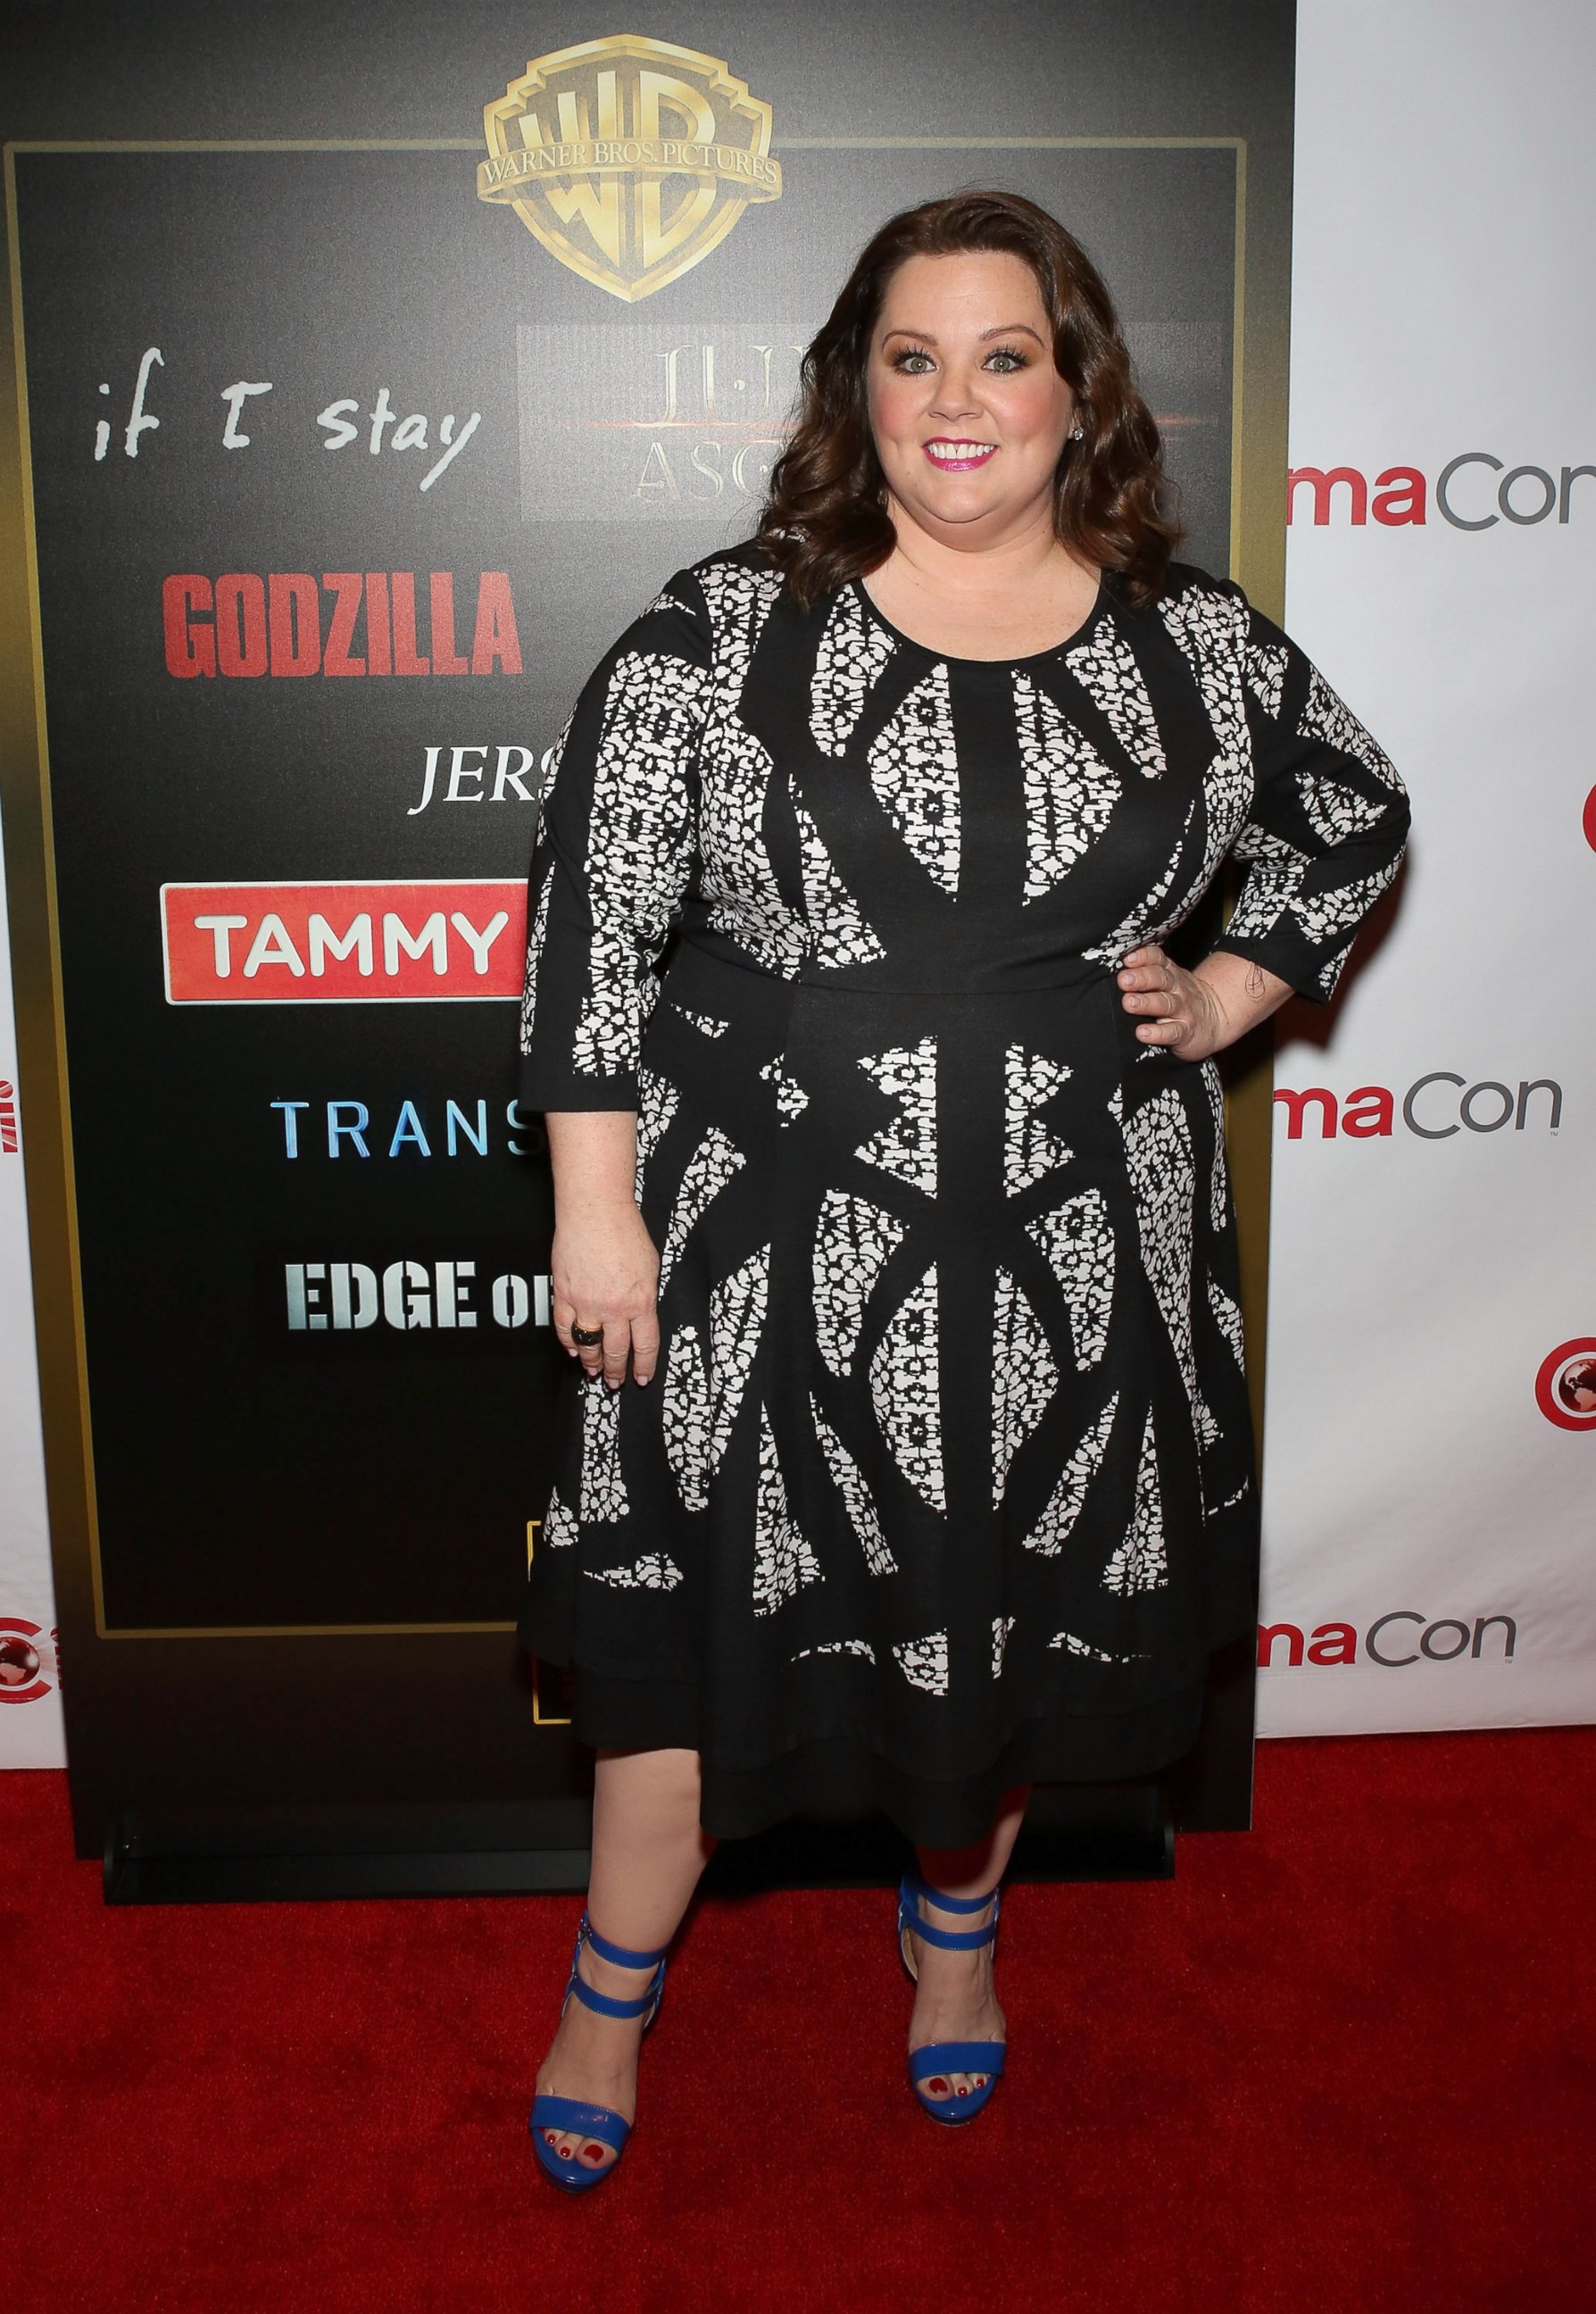 PHOTO: Actress Melissa McCarthy arrives at The Colosseum at Caesars Palace on March 27, 2014 in Las Vegas, Nev. 